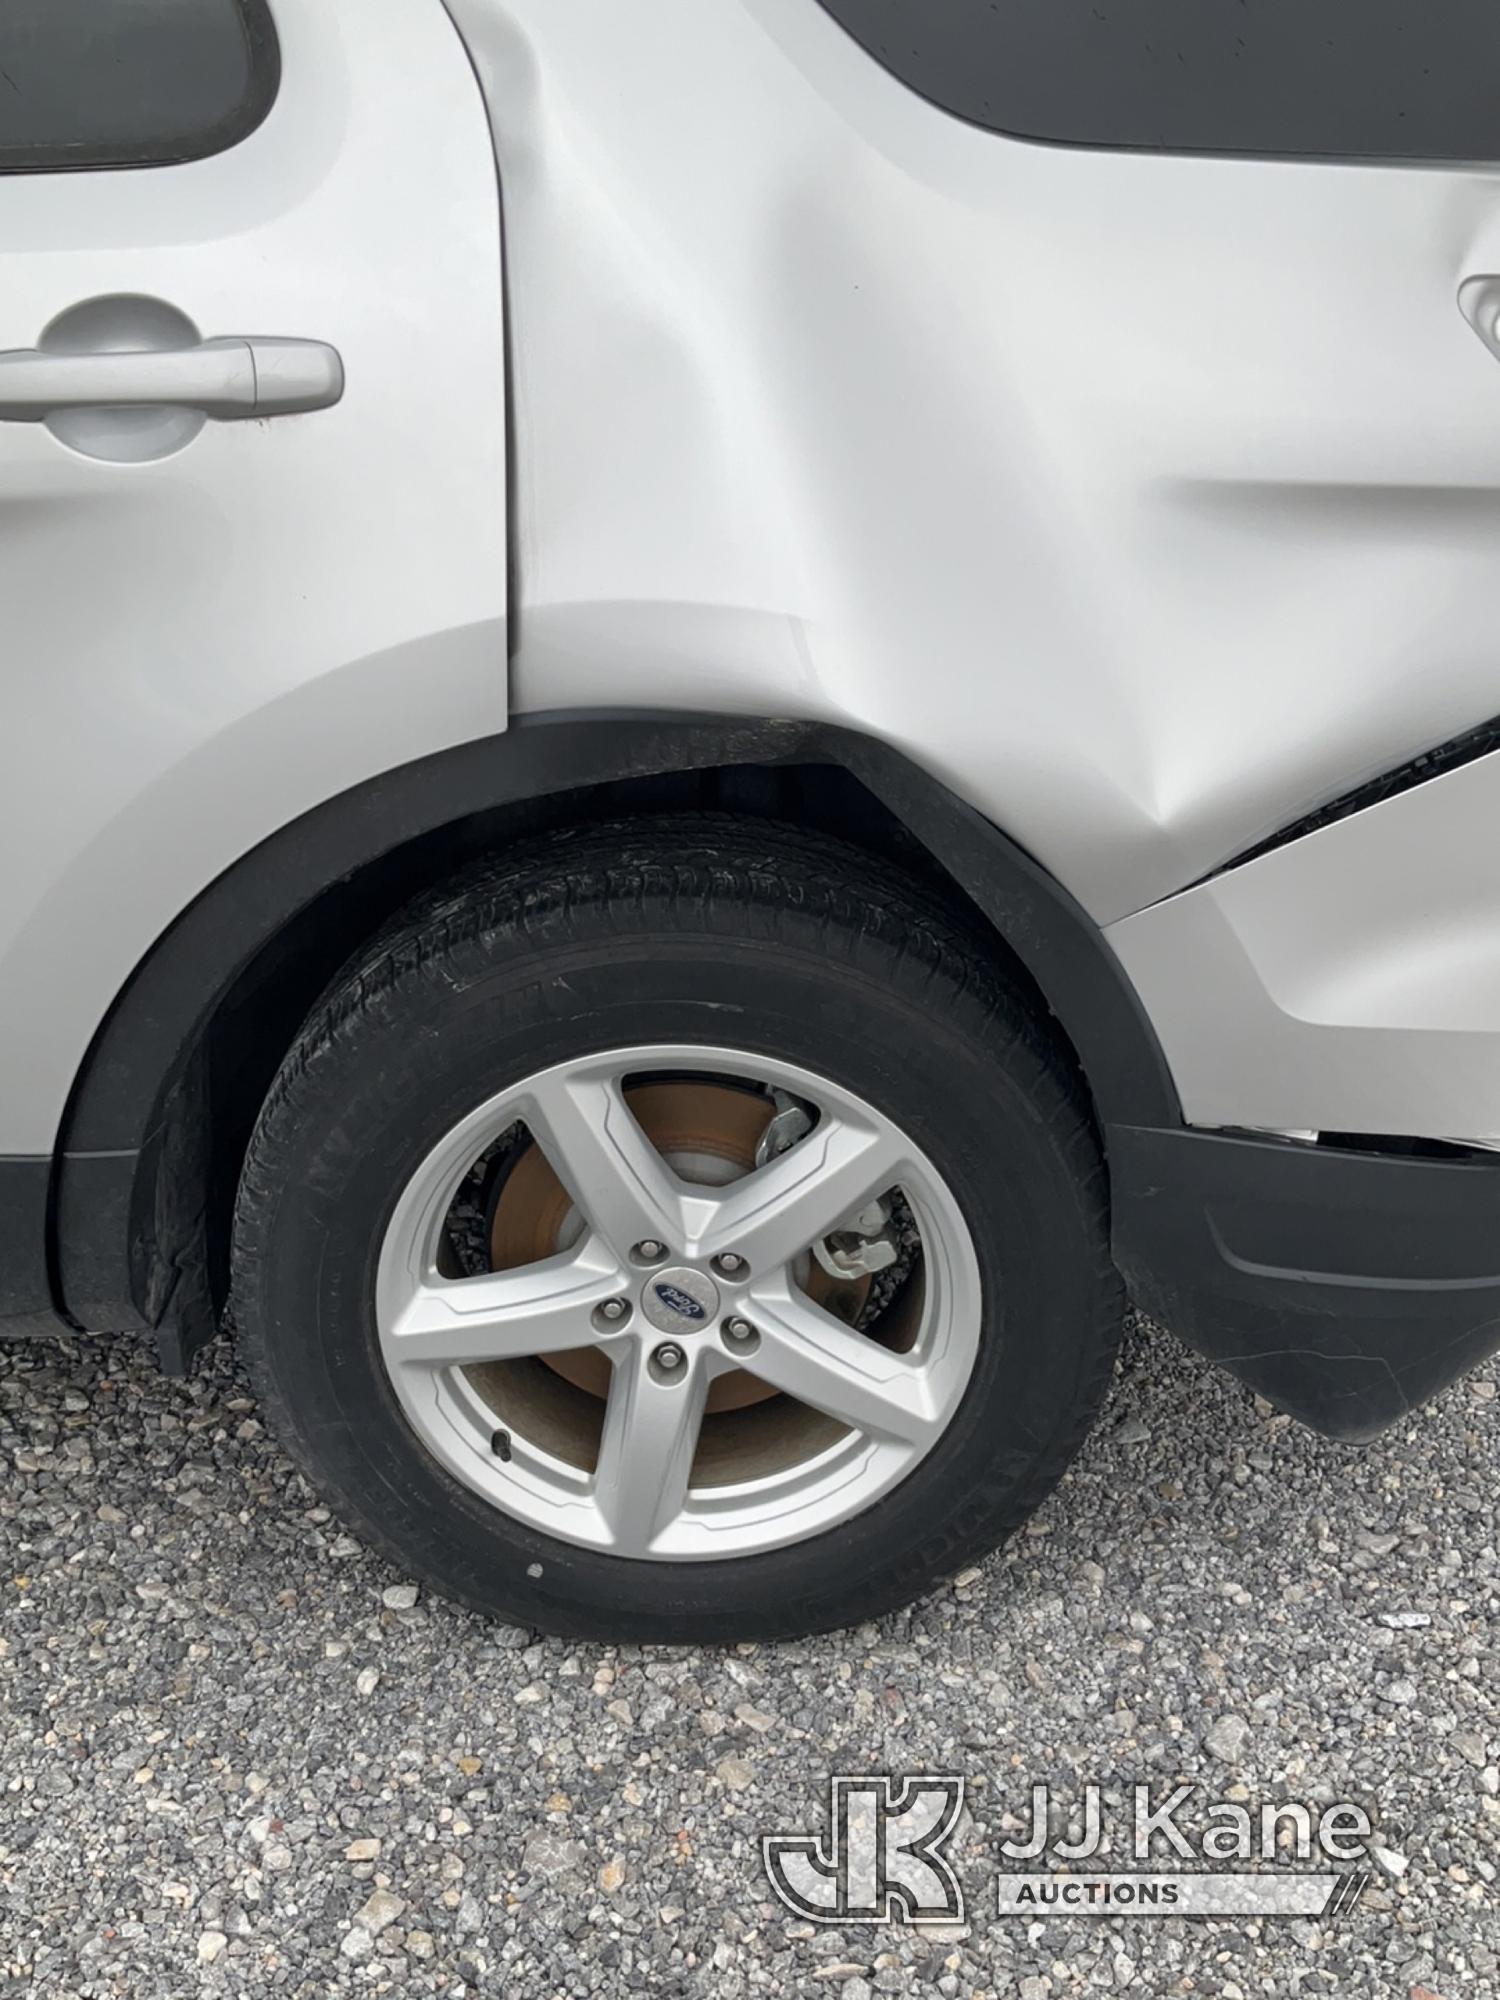 (Las Vegas, NV) 2018 Ford Explorer Wrecked, Missing Parts, Towed In Jump To Star, Runs & Moves